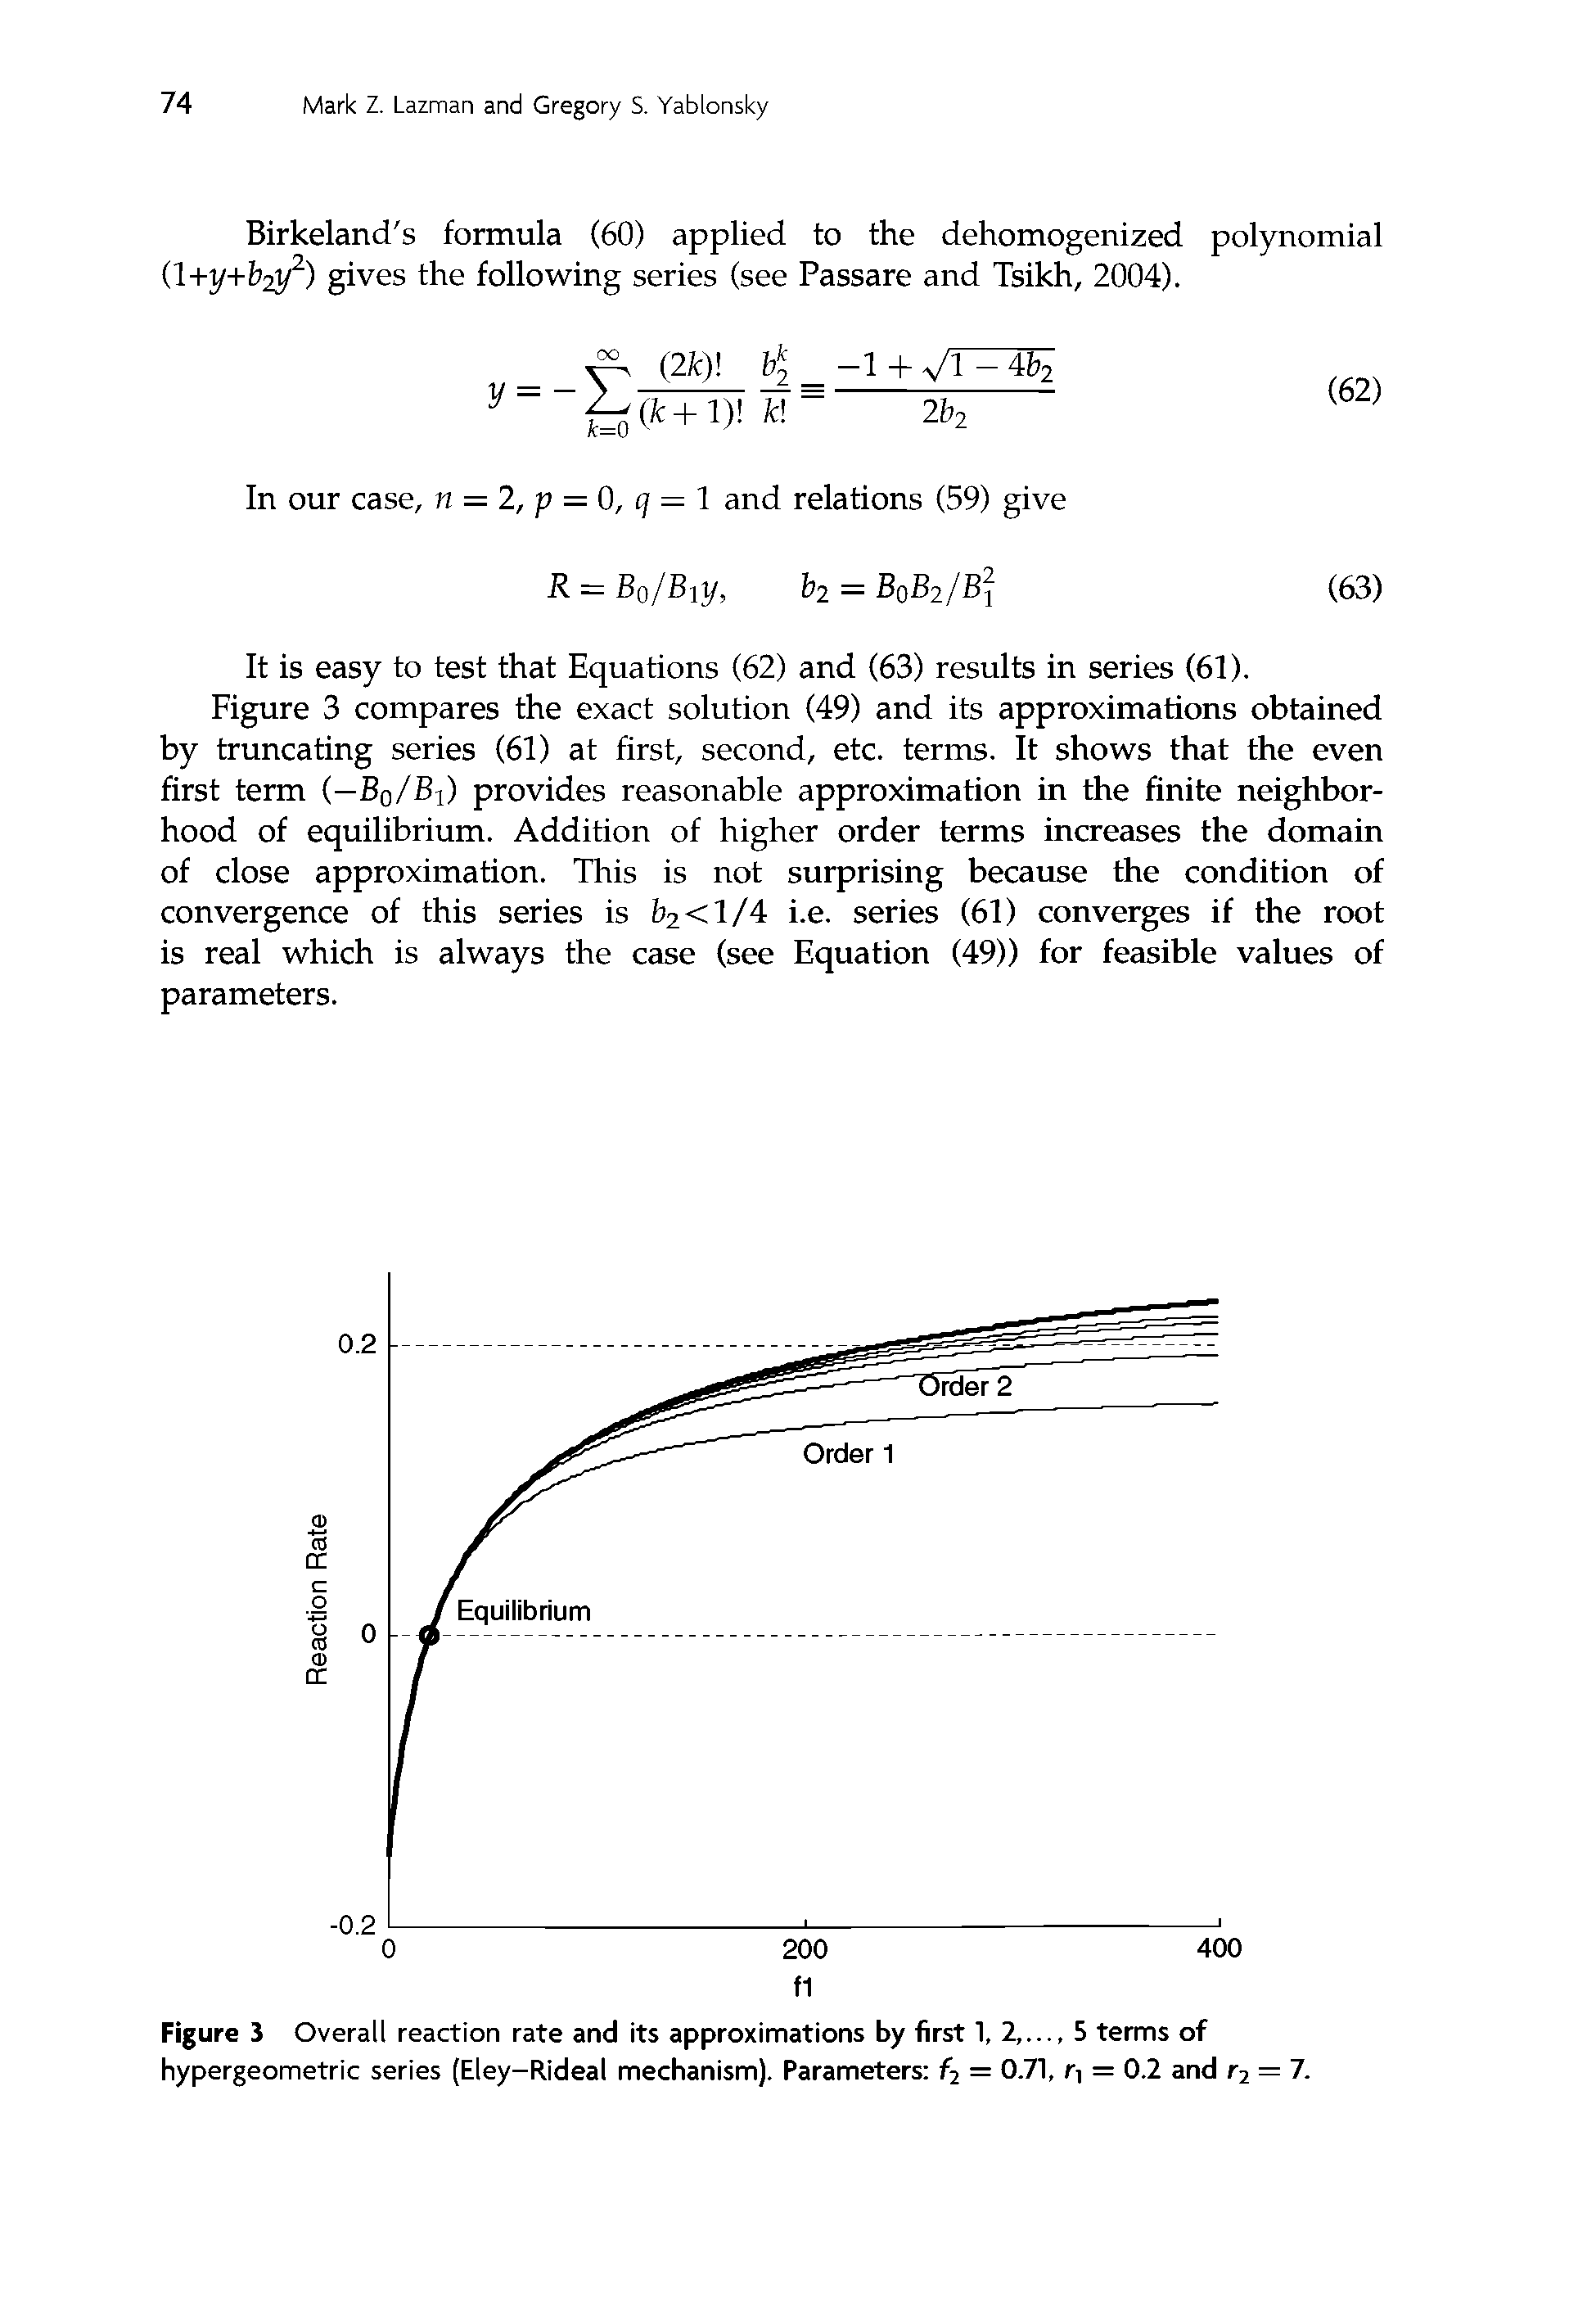 Figure 3 Overall reaction rate and its approximations by first 1, 2,..., 5 terms of hypergeometric series (Eley-Rideal mechanism). Parameters 62 = 0-71, t) = 0.2 and r2 = 7.